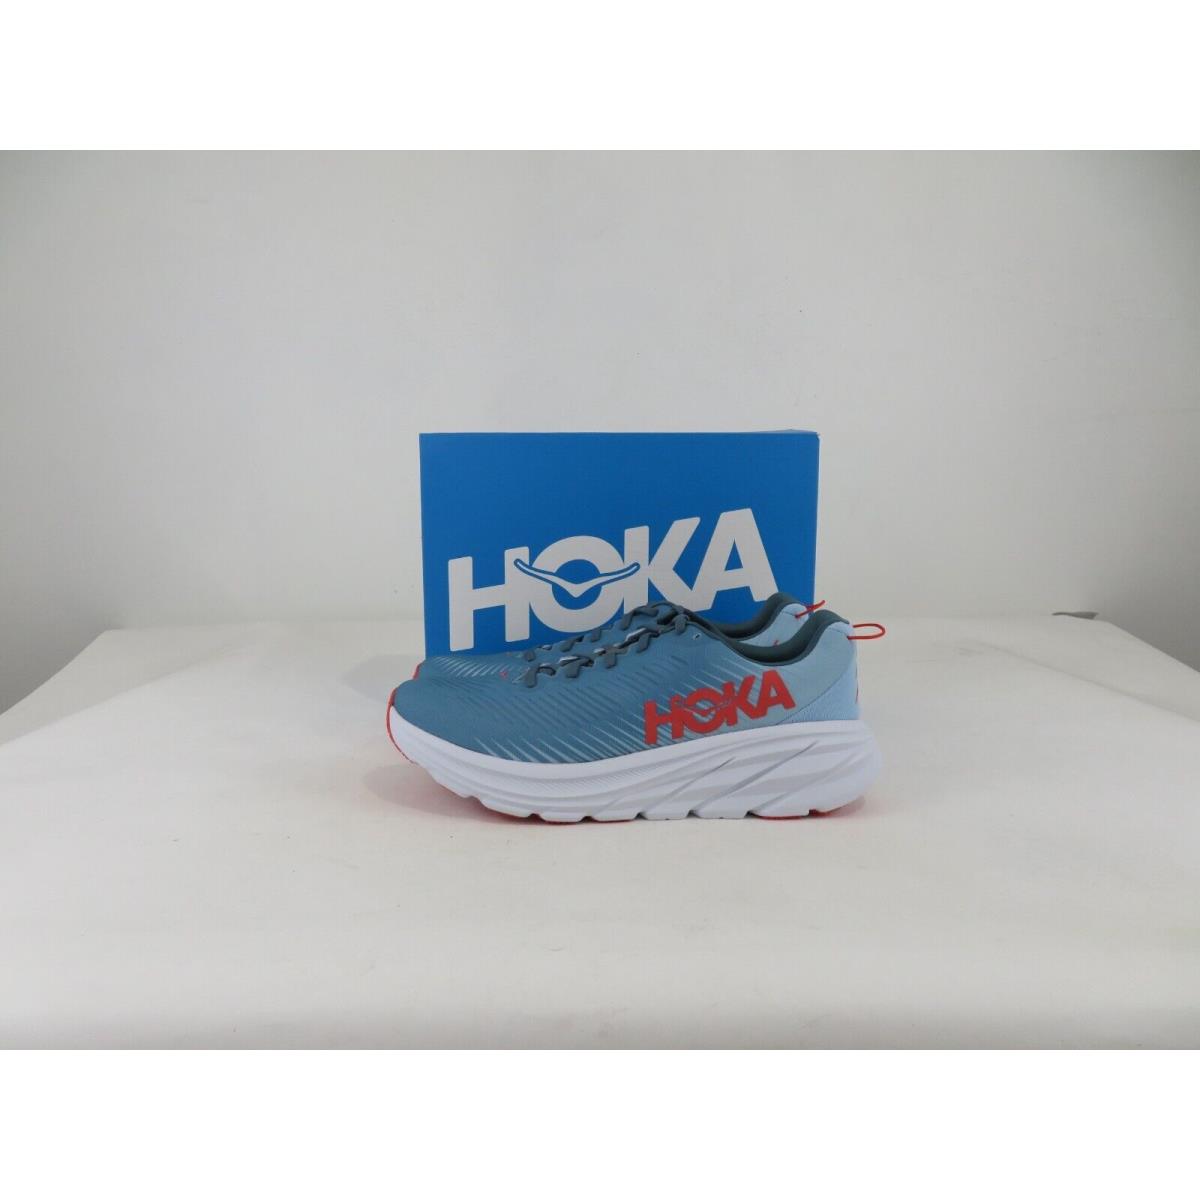 Hoka One One Rincon 3 Mens 10.5 D Shoes Blue Athletic Running Walking Sneaker